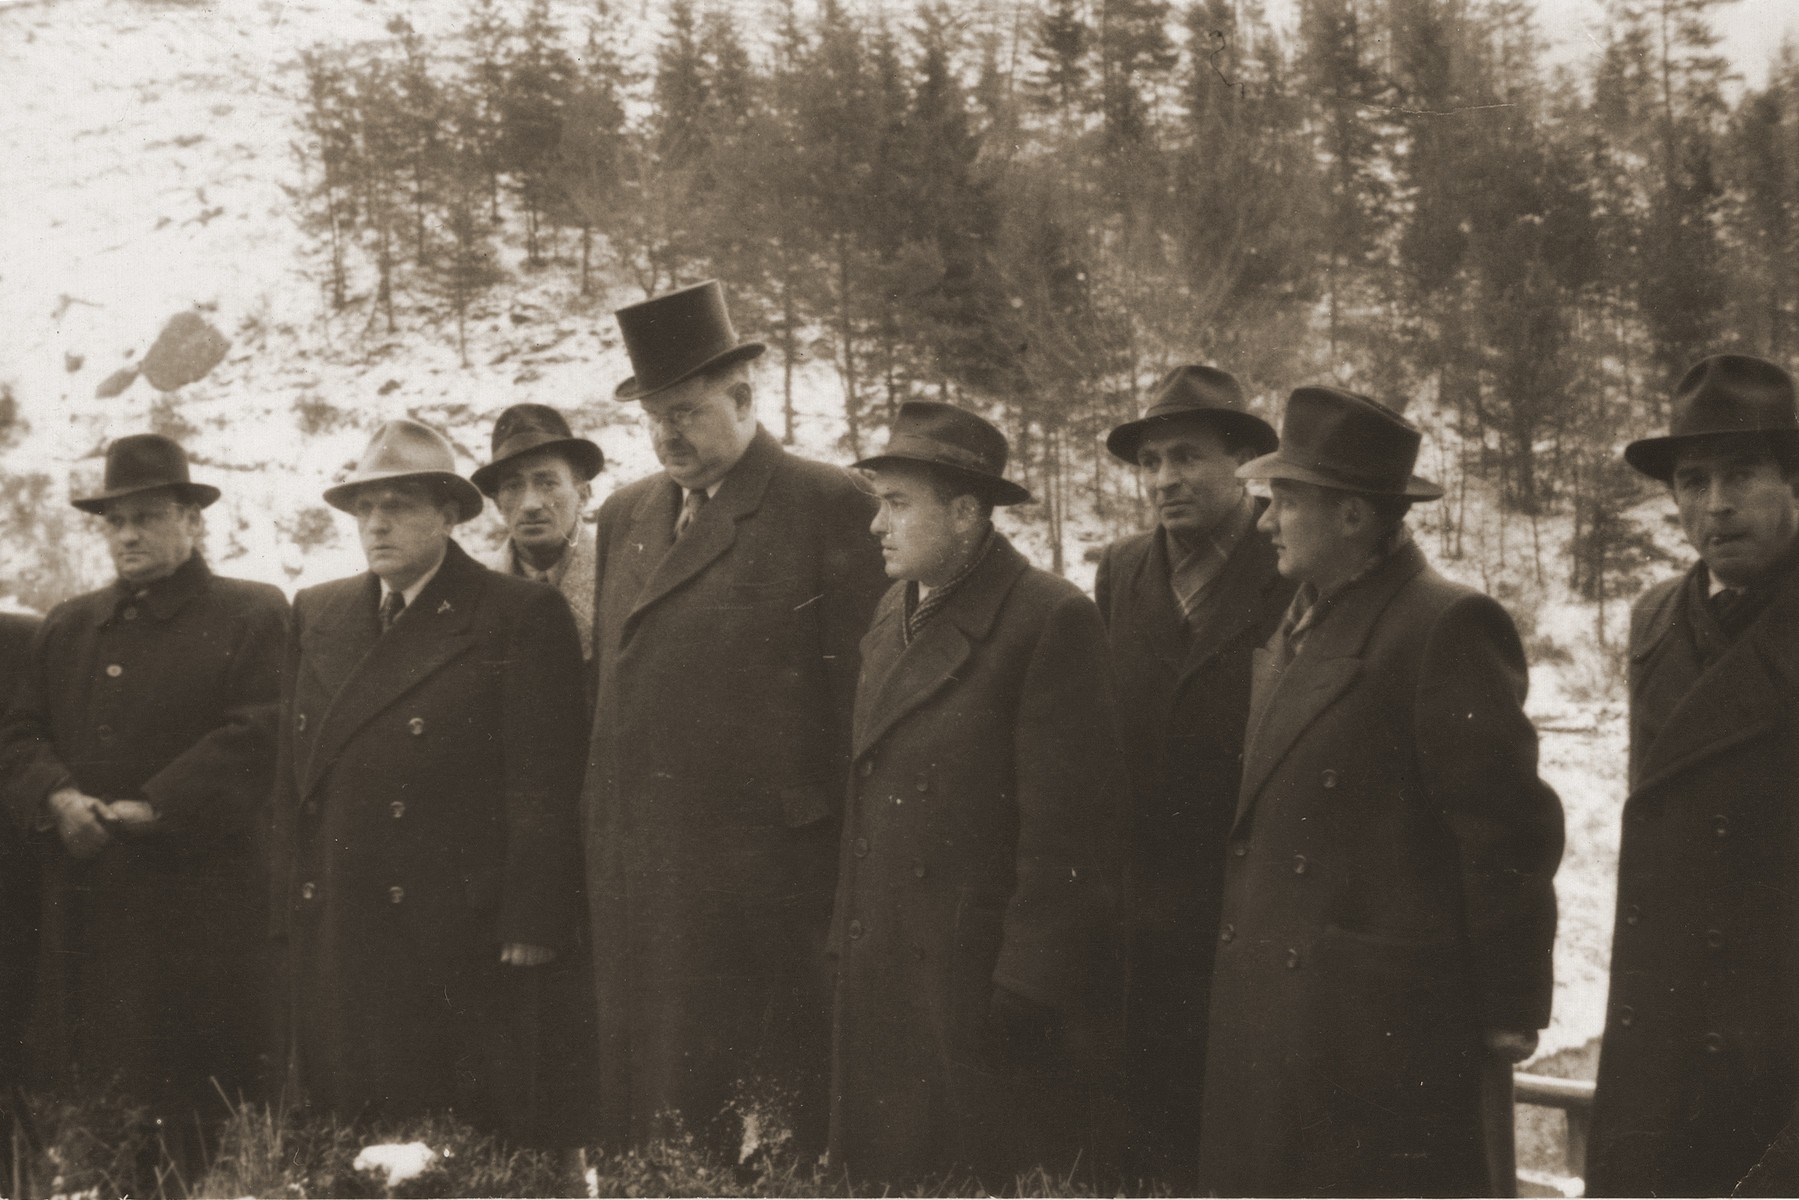 Survivors attend a memorial service for Jewish victims at the Flossenbuerg concentration camp. 

From left to right are Israel Igster, Weingarten, ?, Philipp Auerbach, Palucki, Motek Fishel, and Krzepicki.